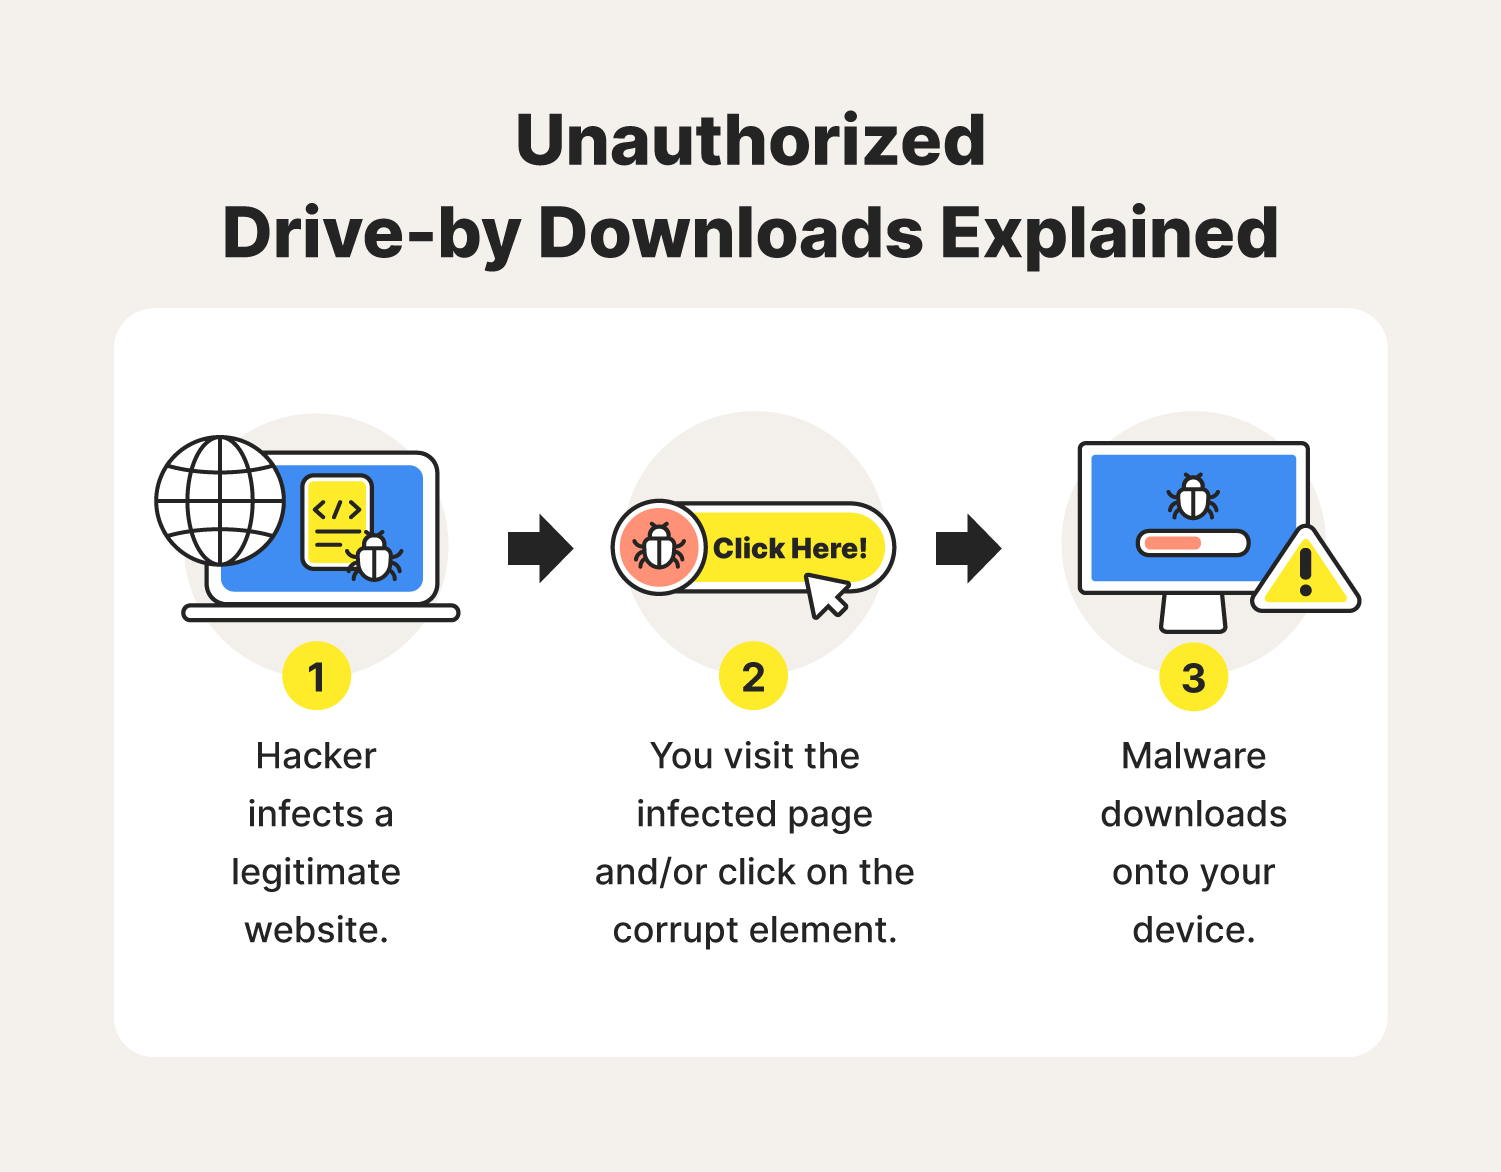 /content/dam/norton/global/images/non-product/misc/tlc/unauthorized-drive-by-downloads-explained.png